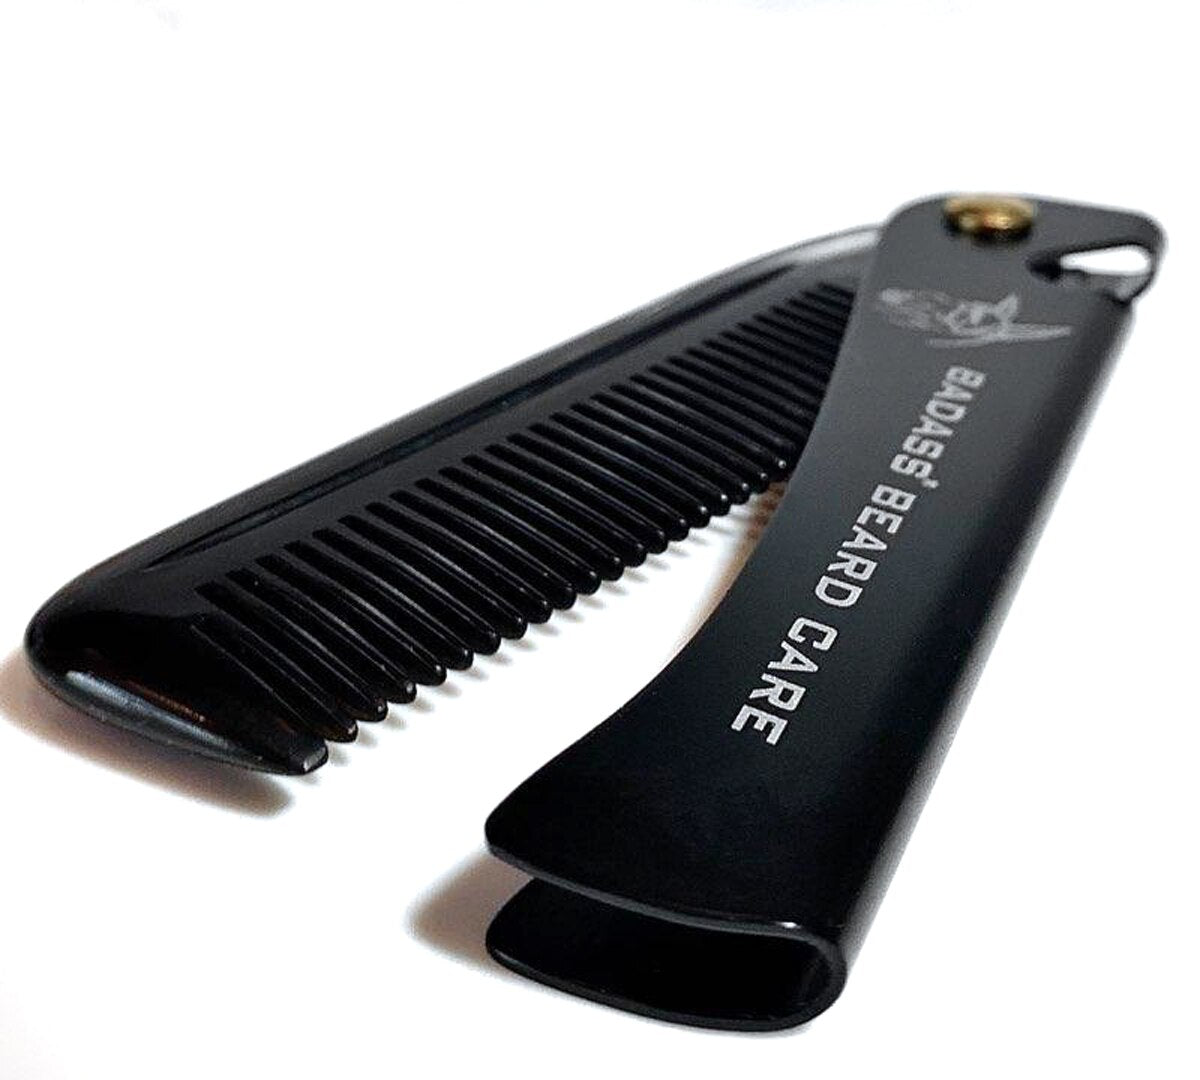 2-in-1 Folding Ox Horn Comb